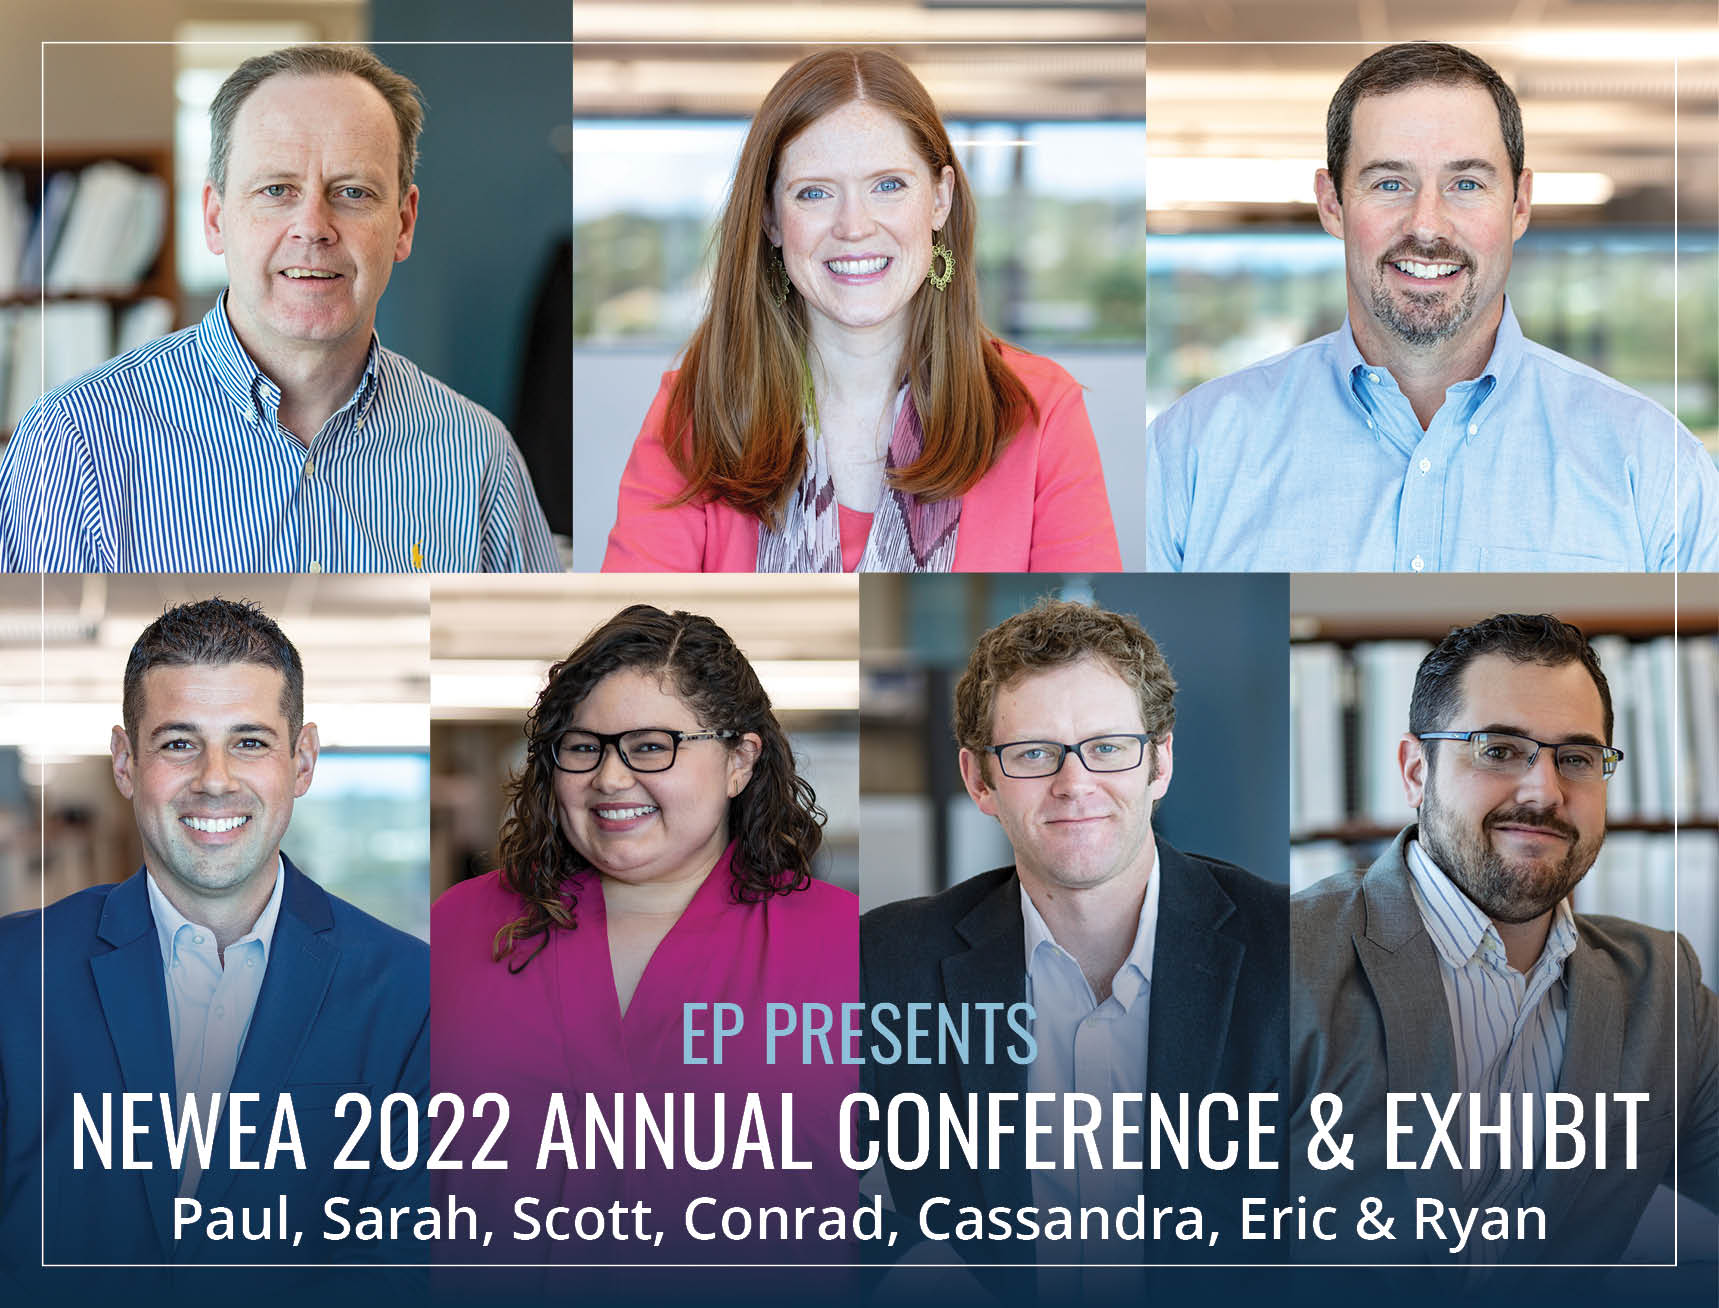 EP Presents at NEWEA 2022 Annual Conference & Exhibit Environmental